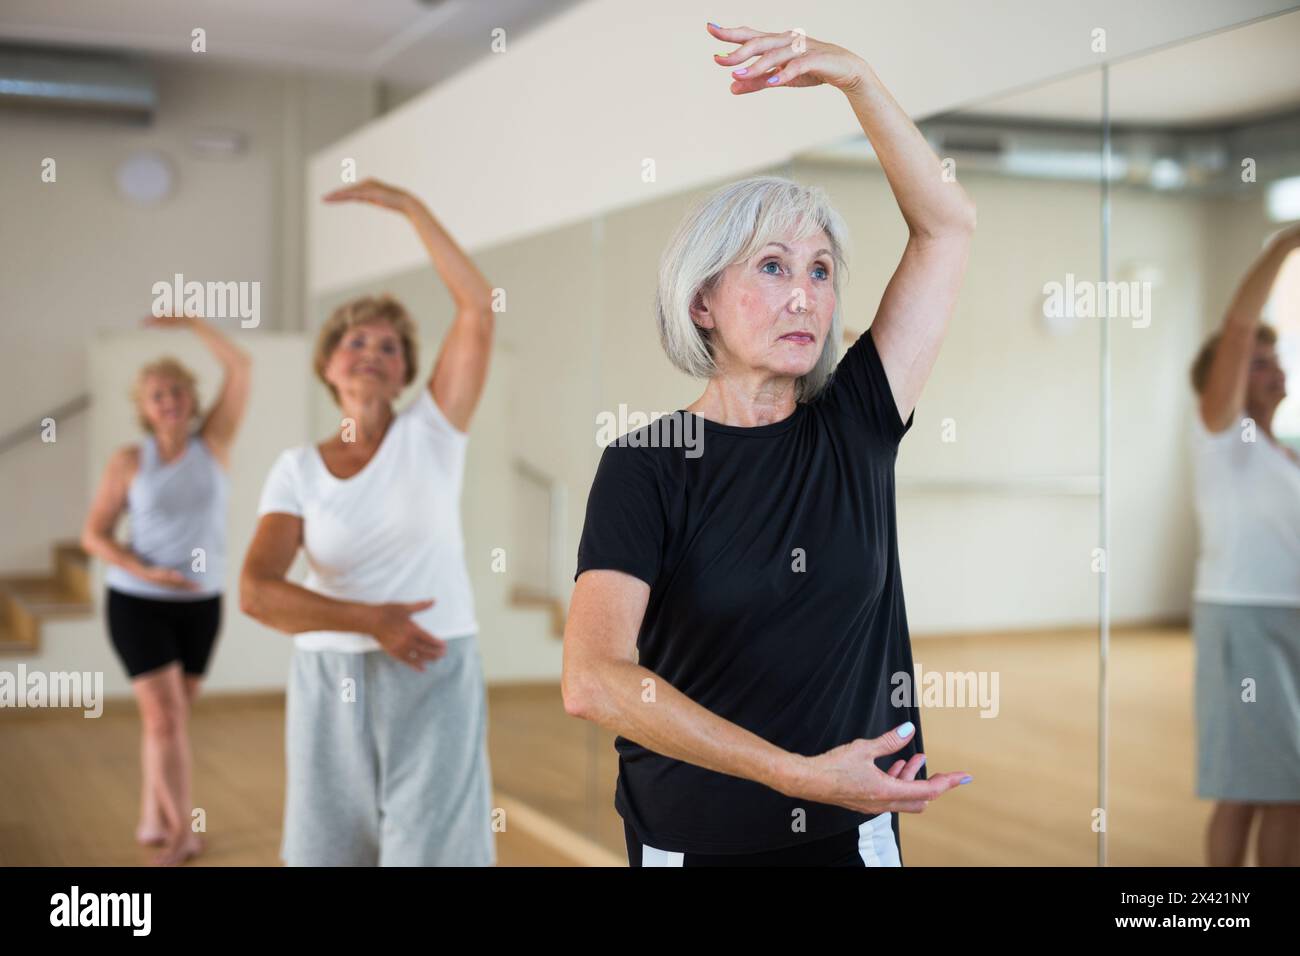 Mature woman learning classical ballet technique in choreography class Stock Photo